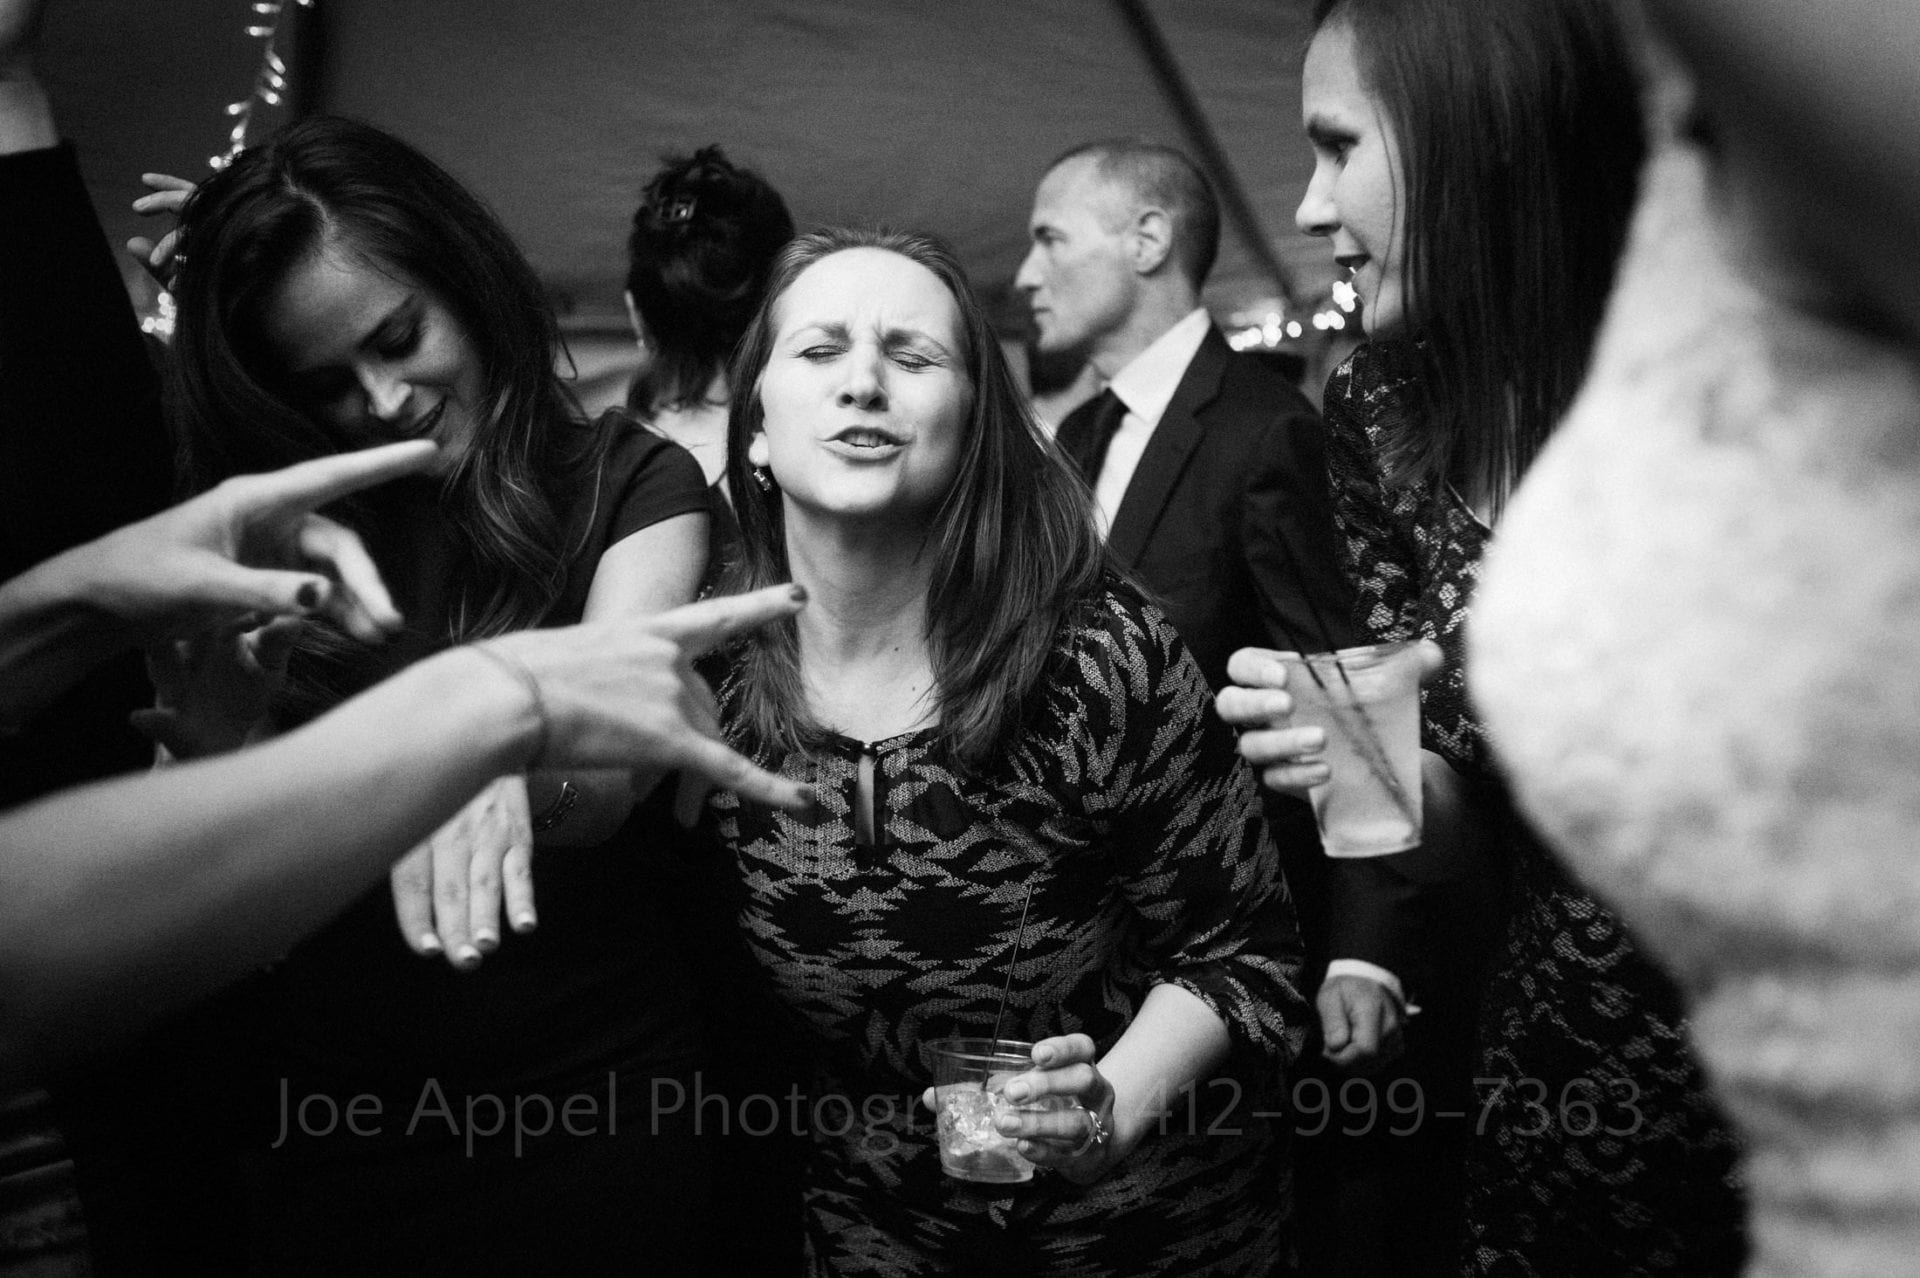 A woman closes her eyes and sings while dancing. Two hands come in from the left side of the frame and point at her. Wedding Photography In West Virginia.